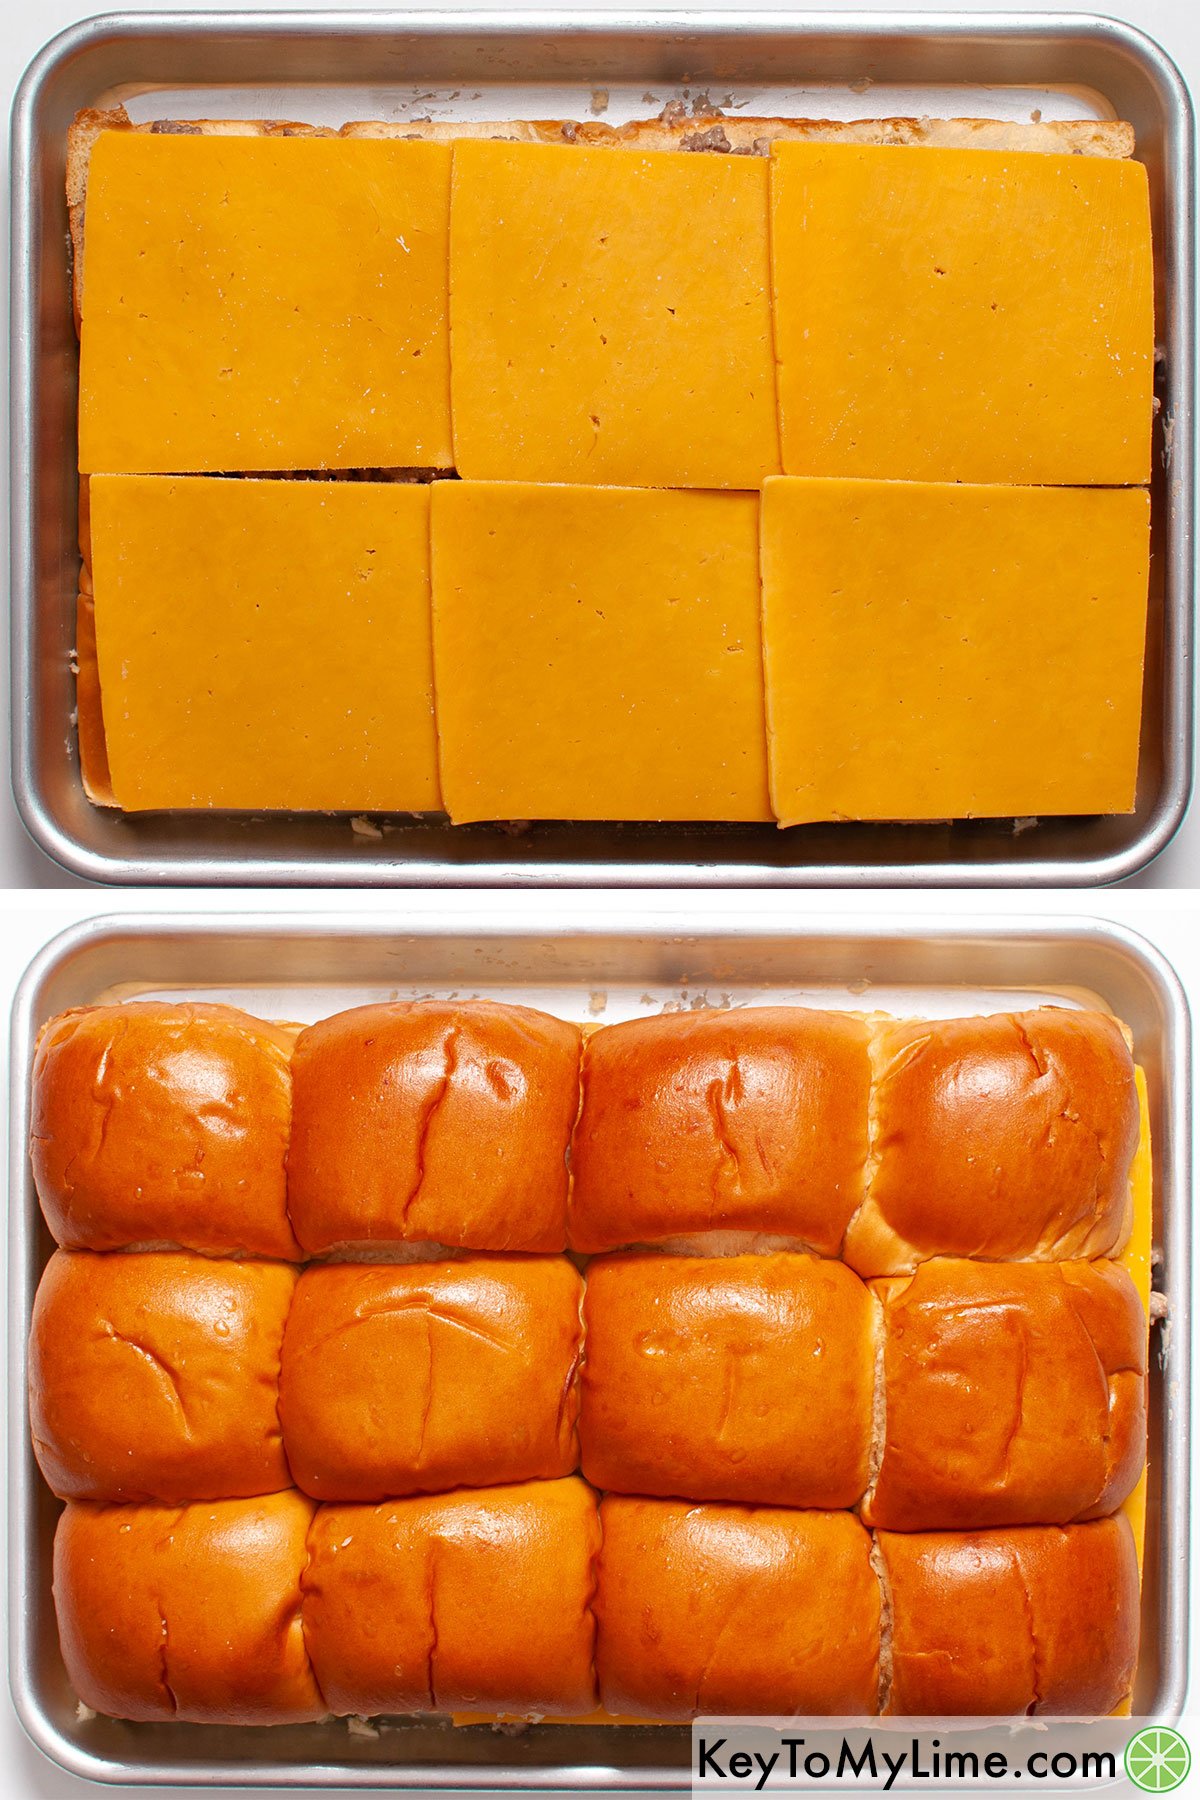 Adding sliced cheese and the tops of the Hawaiian rolls to the sliders.